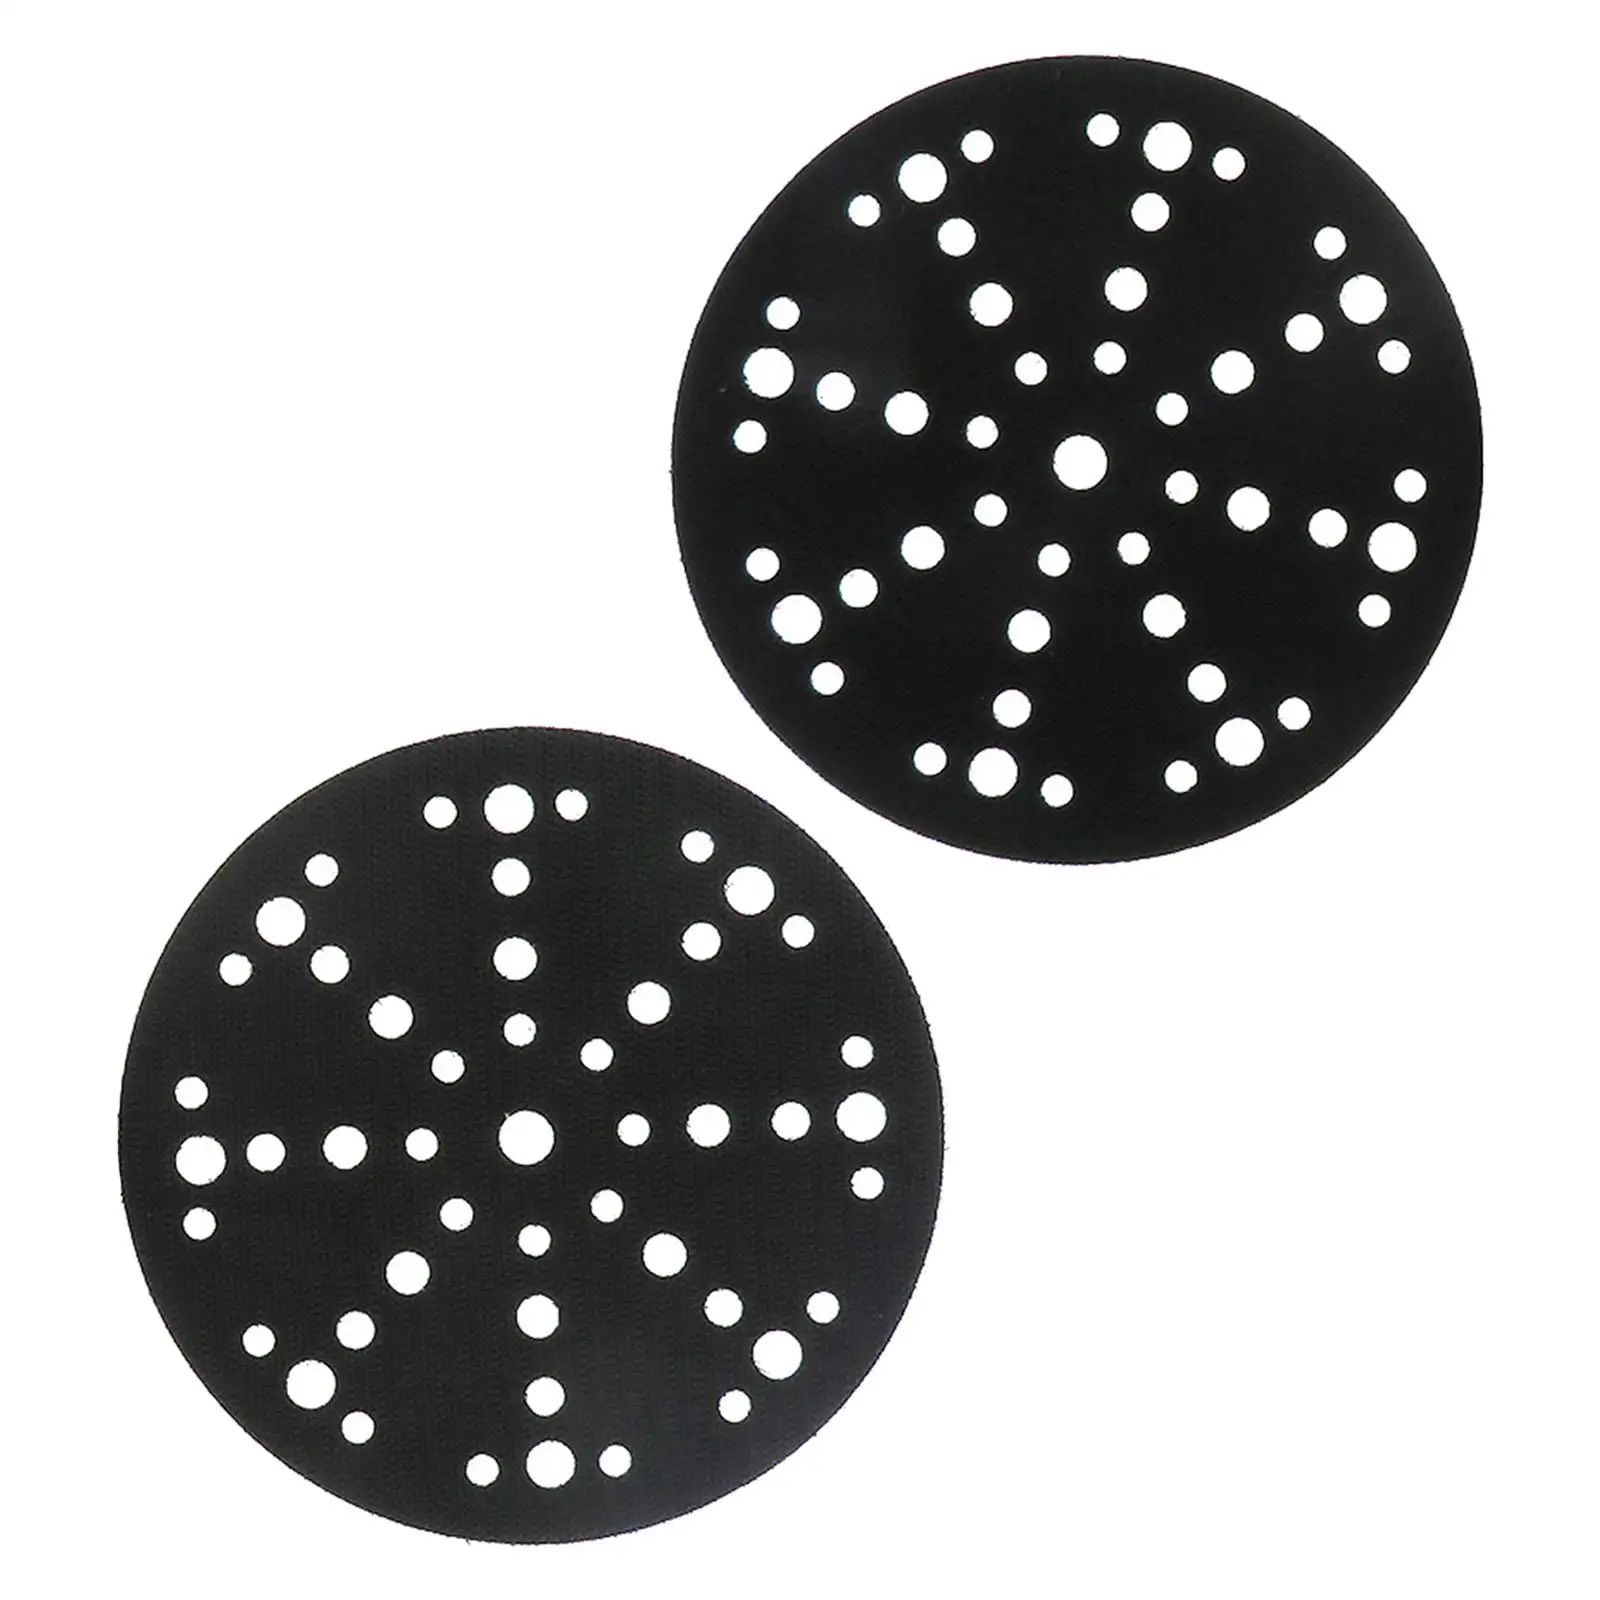 2x Sandpaper Disc Pads 6Inches 48 Holes Practical Grinding Plates Durable Backing Grinding Polishing Pad Disc for Polisher